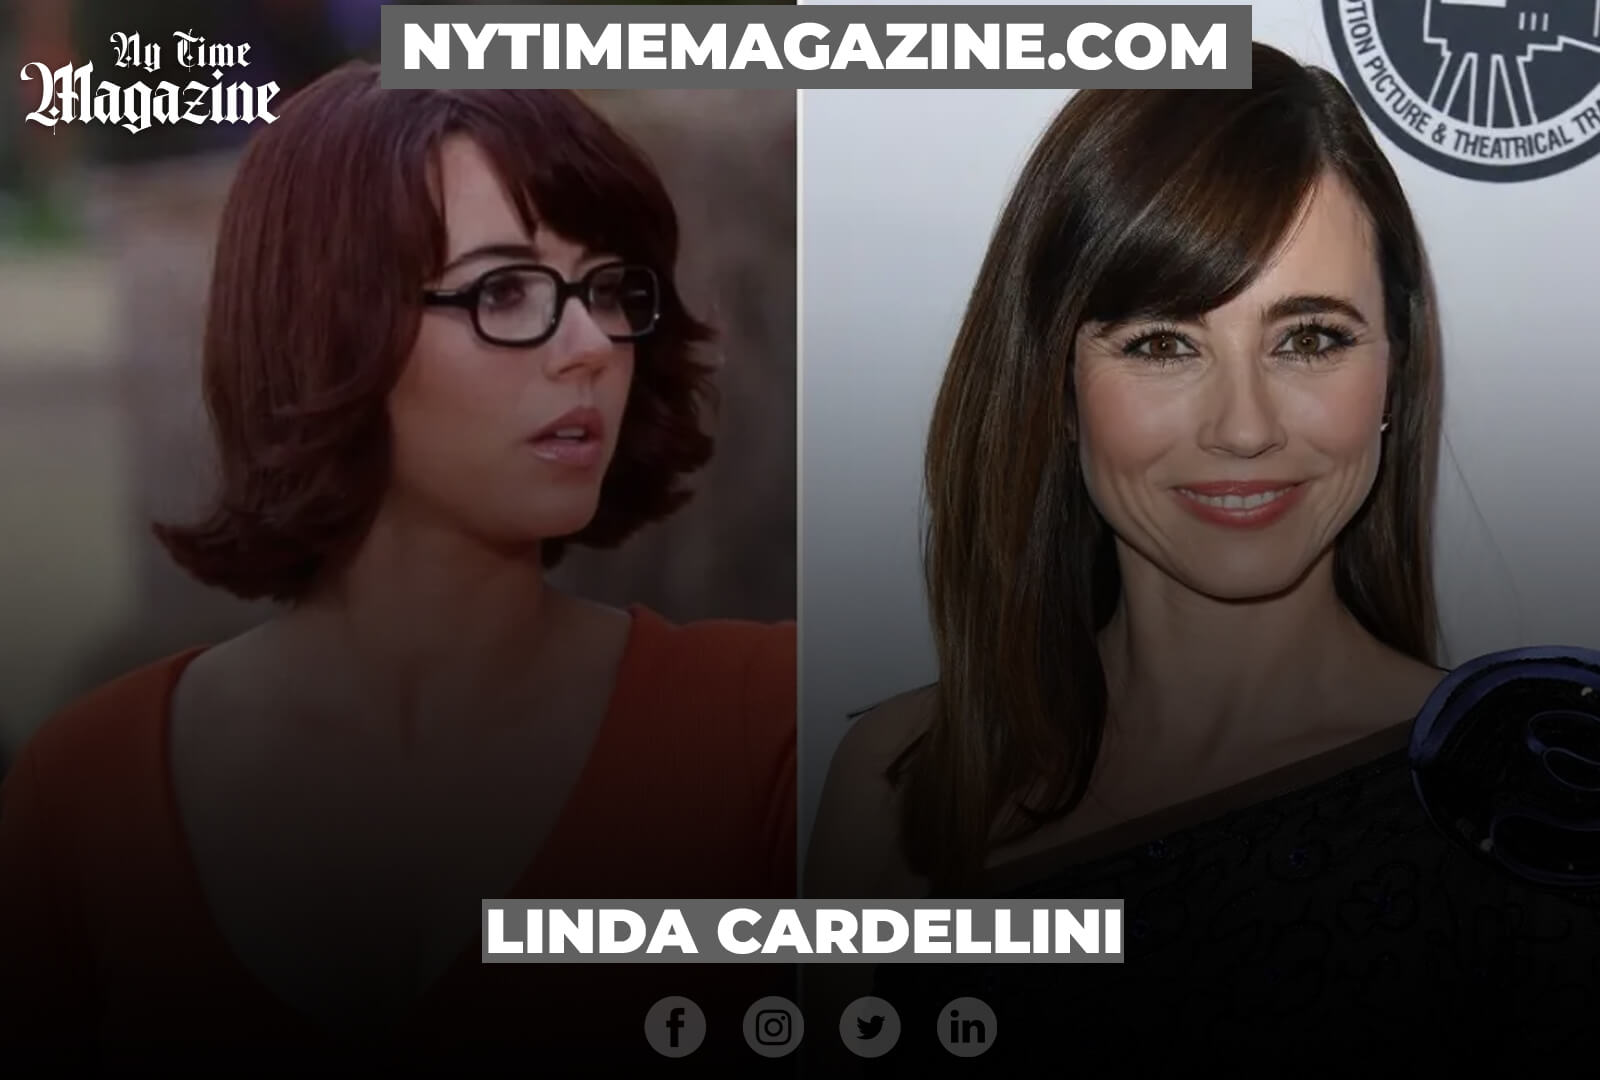 Linda Cardellini: Hollywood and Society - Depths of Talent and Advocacy